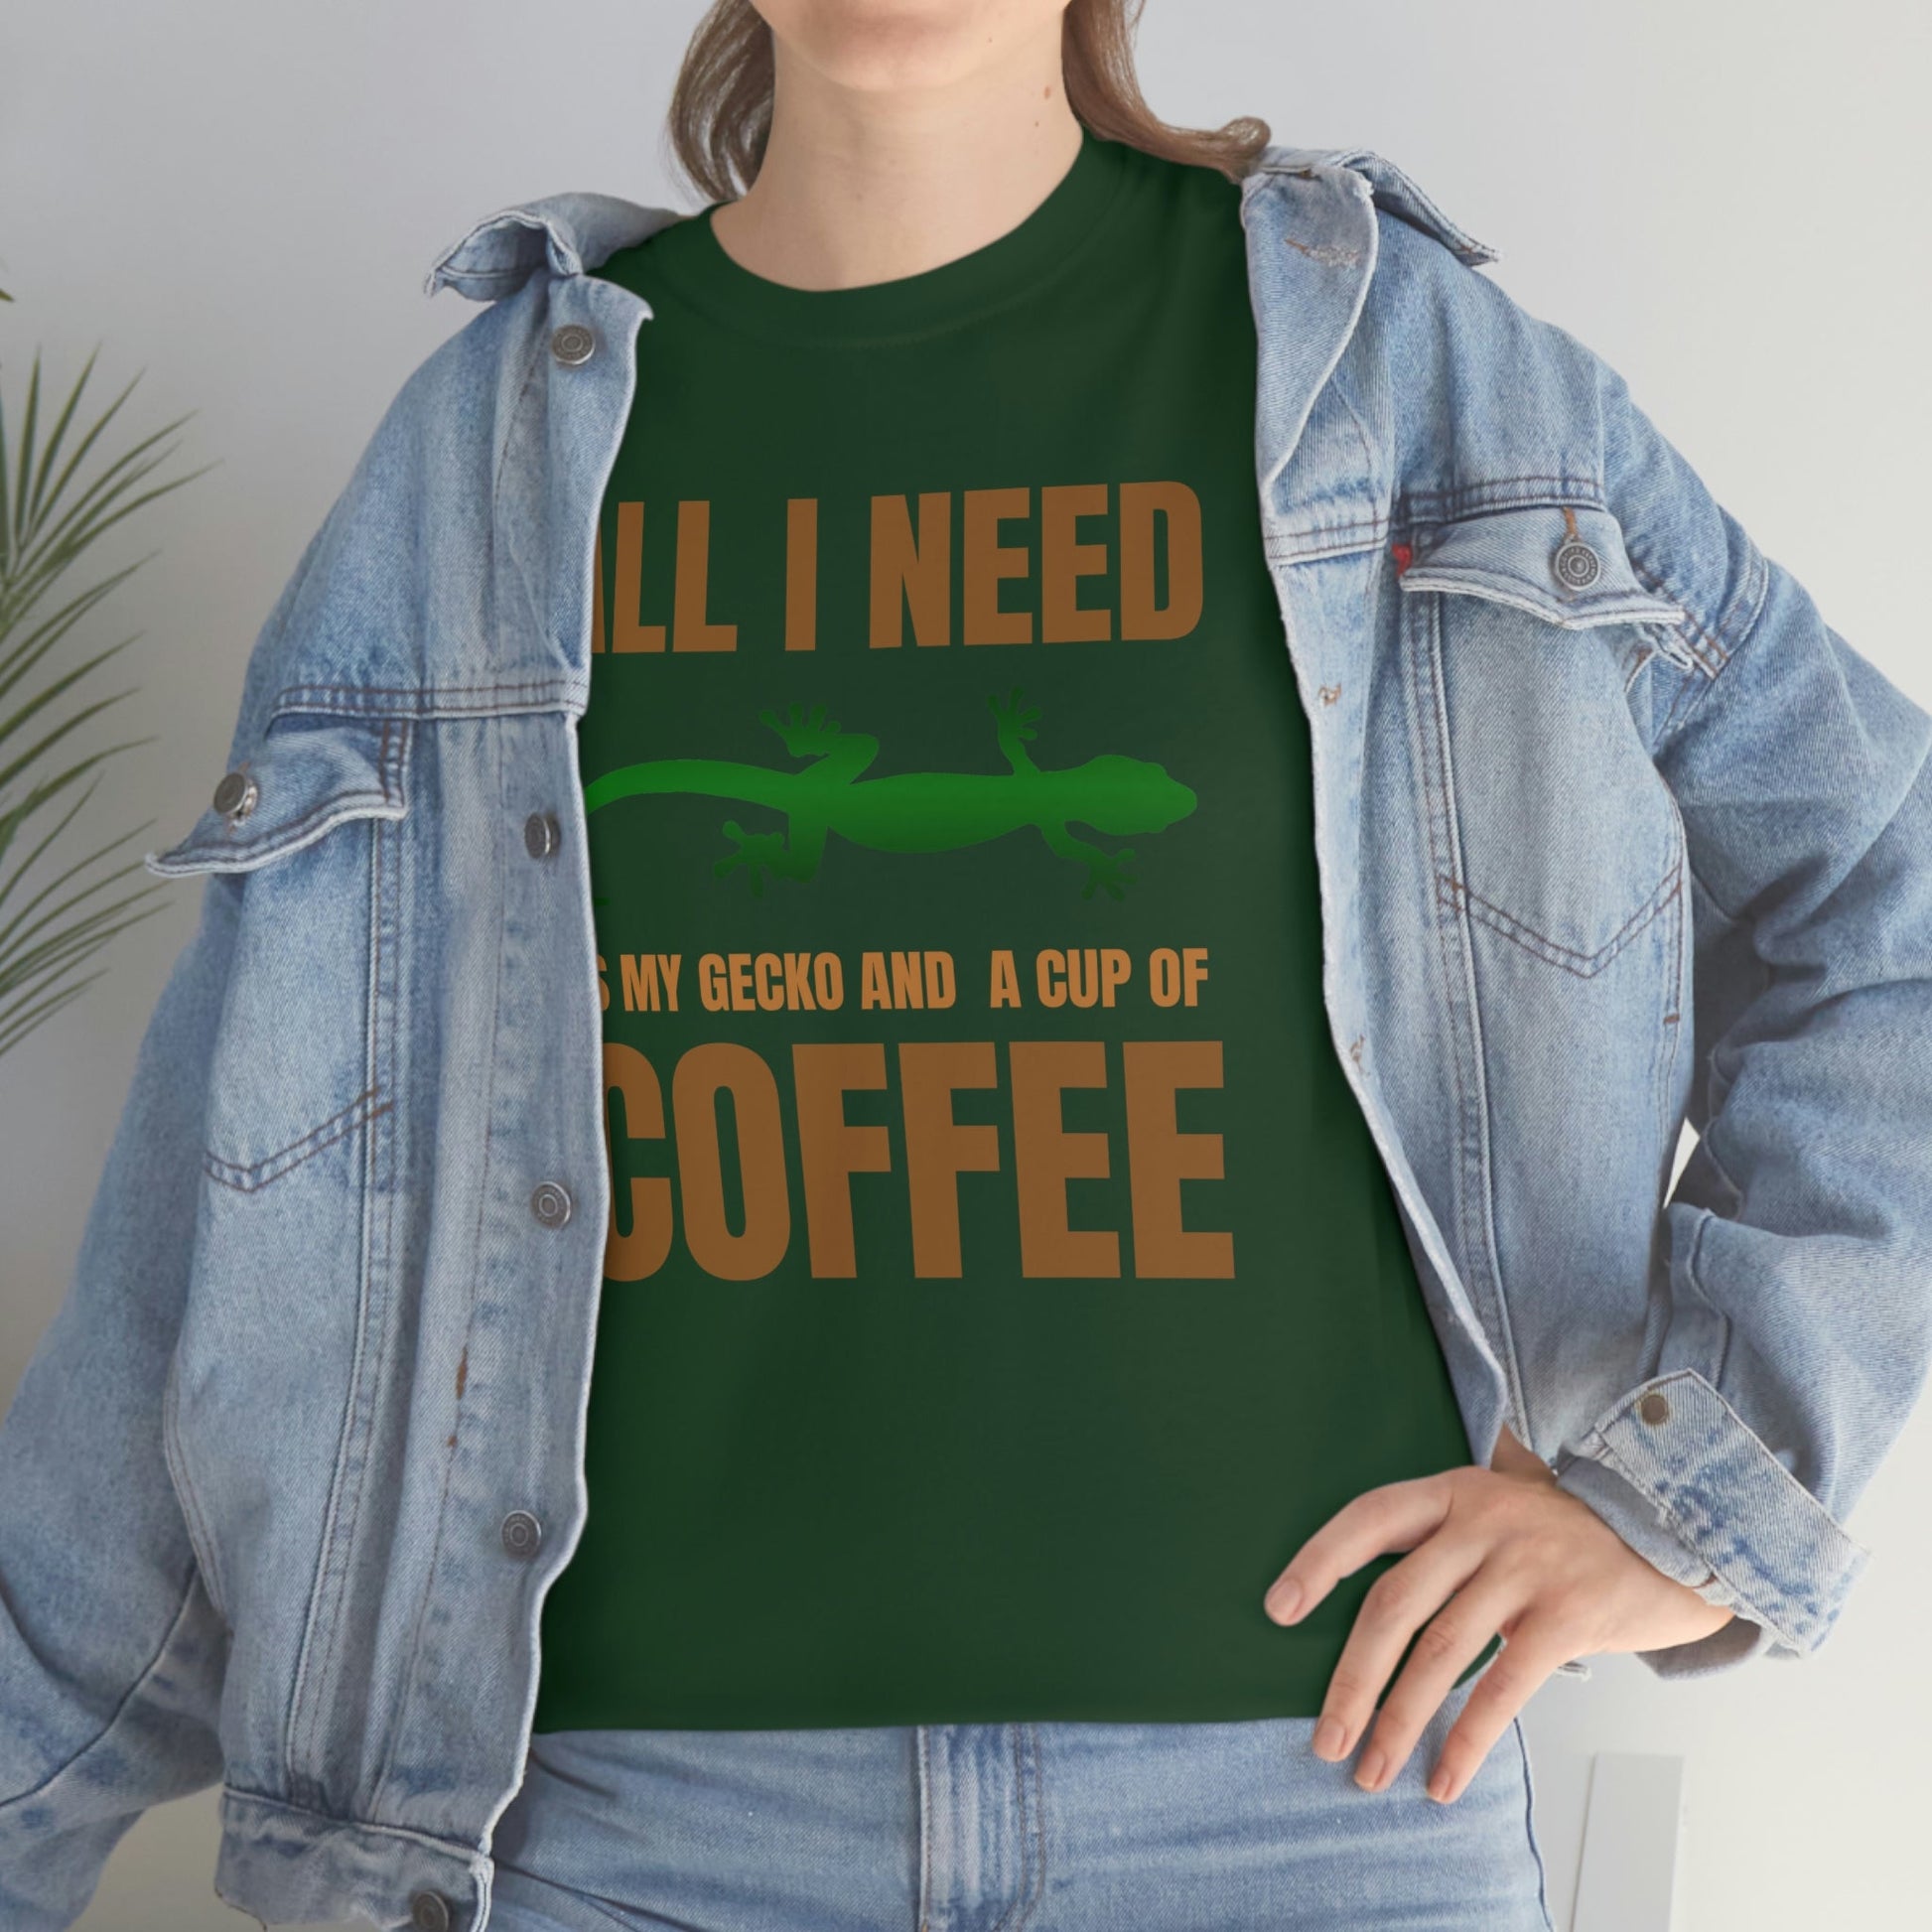 All I Need is My Gecko and a Cup of Coffee Heavy Cotton T-Shirt